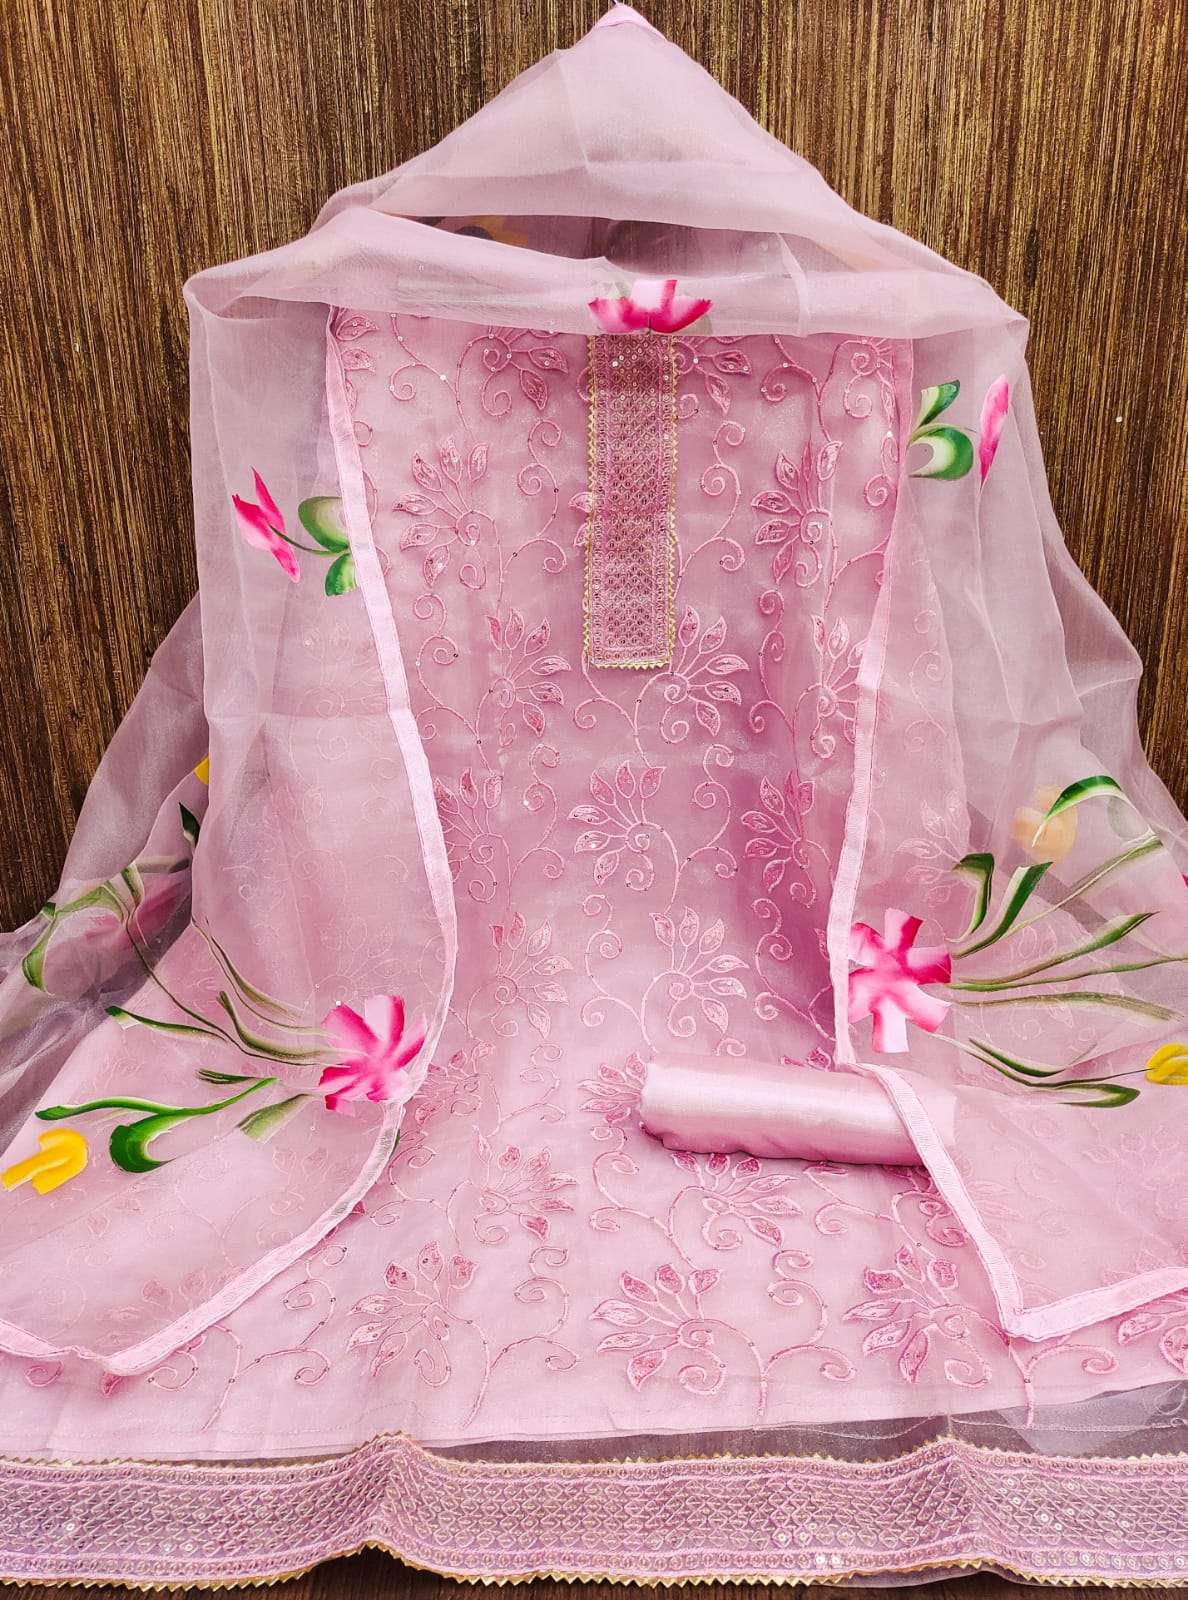 bt-17 organza tiss embroidery suit 